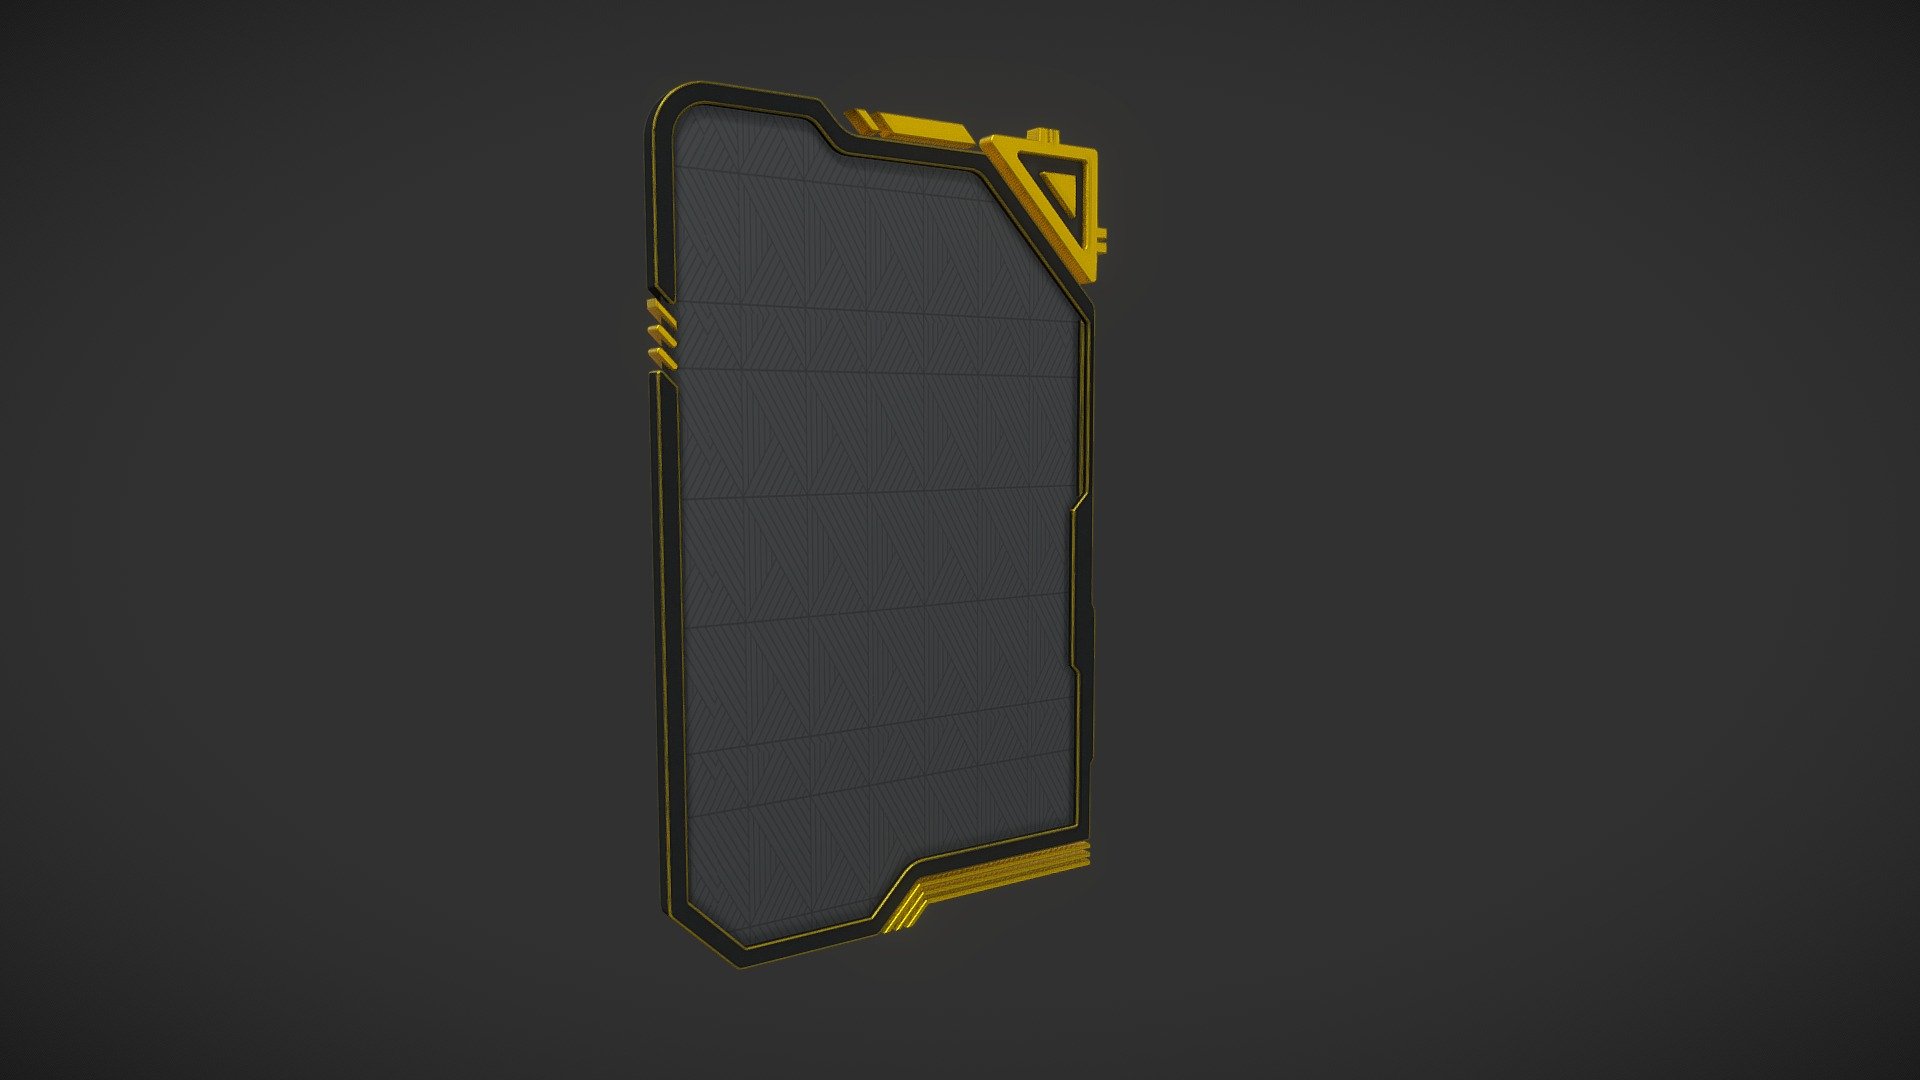 Vip-Card
Low-Poly card
Blender, Substance Painter - Vip-Card - 3D model by malkoff.danila 3d model